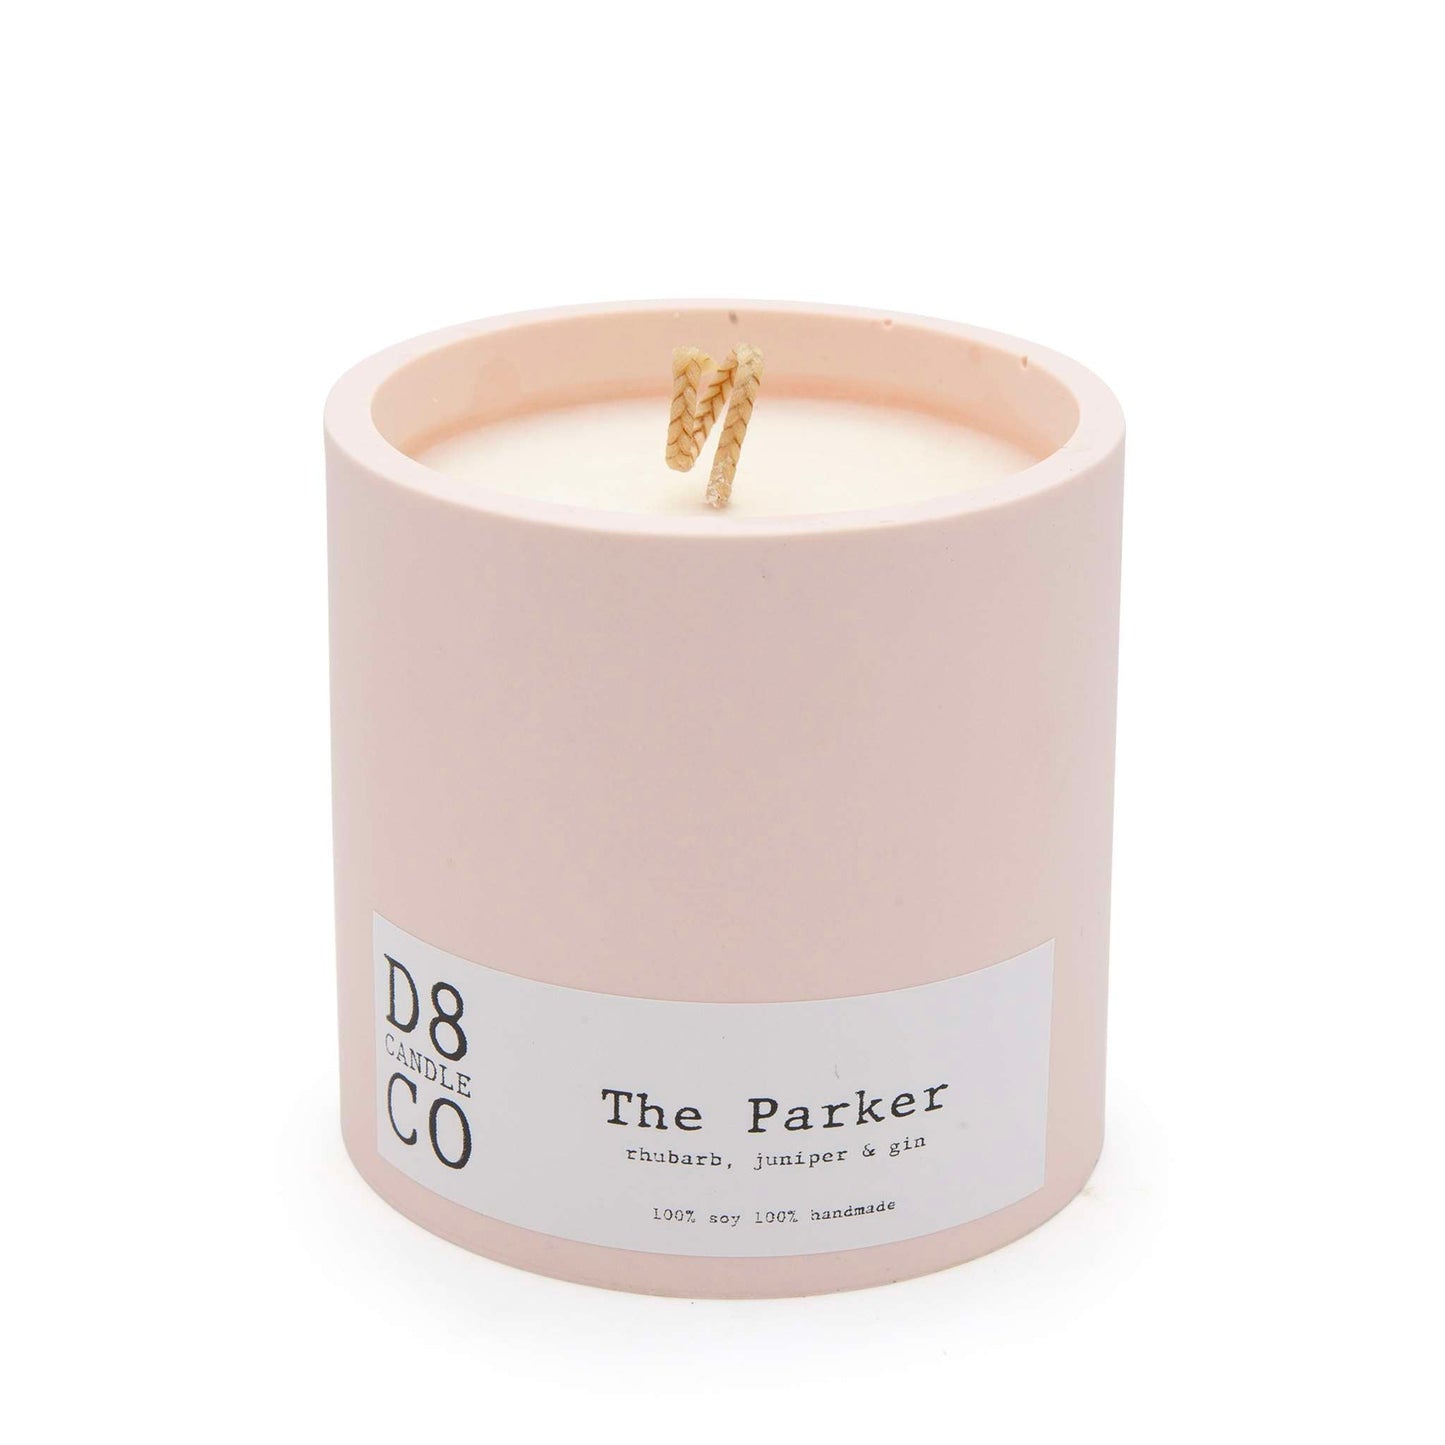 D8 Candle Co. Candles The Parker Candle - D8 Candle Co.